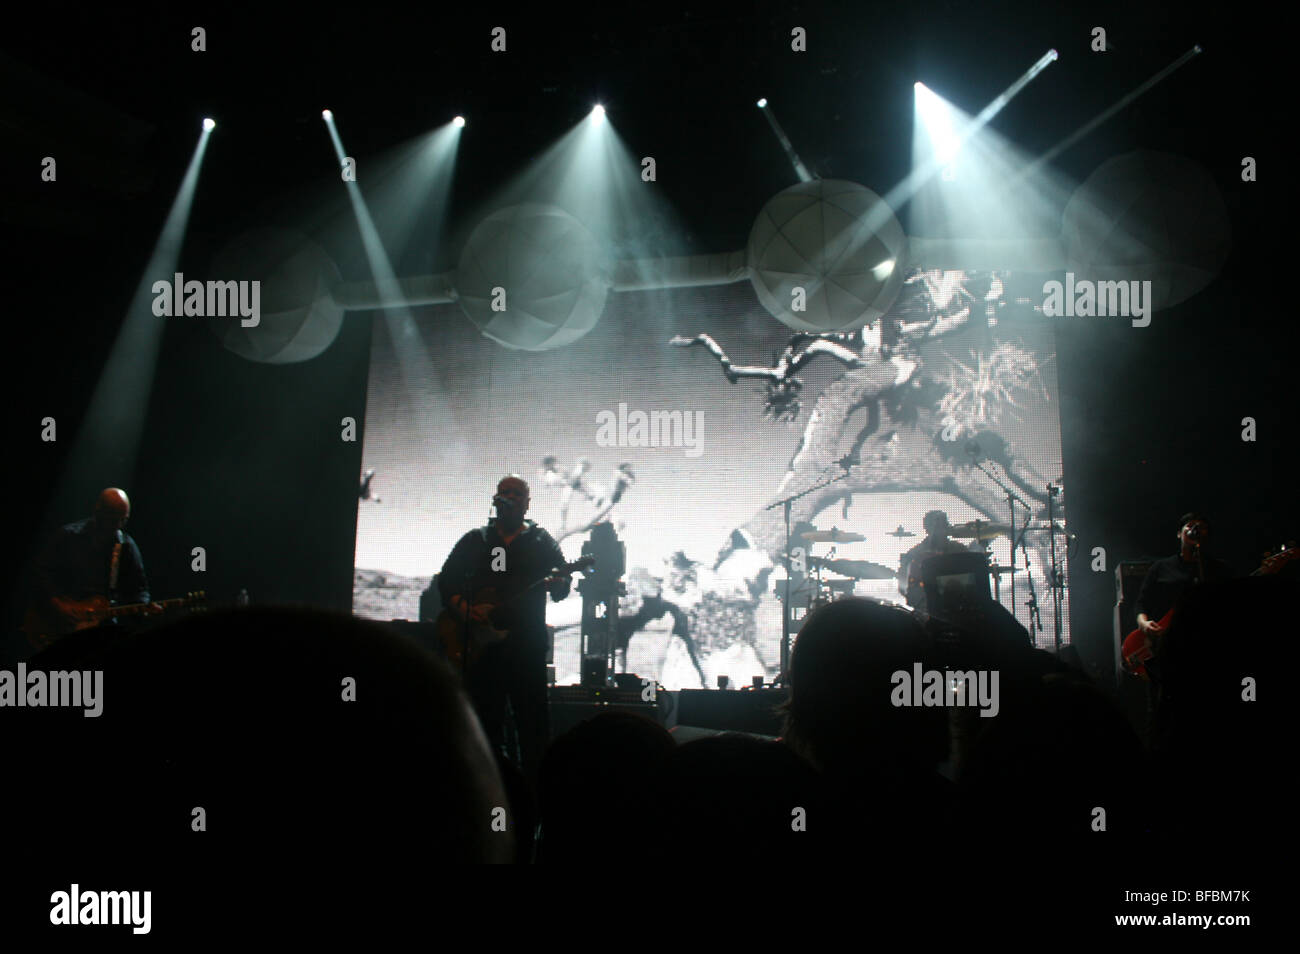 The Pixies play a concert at the Hollywood Palladium, Doolittle tour, with black and white film projected behind them Stock Photo